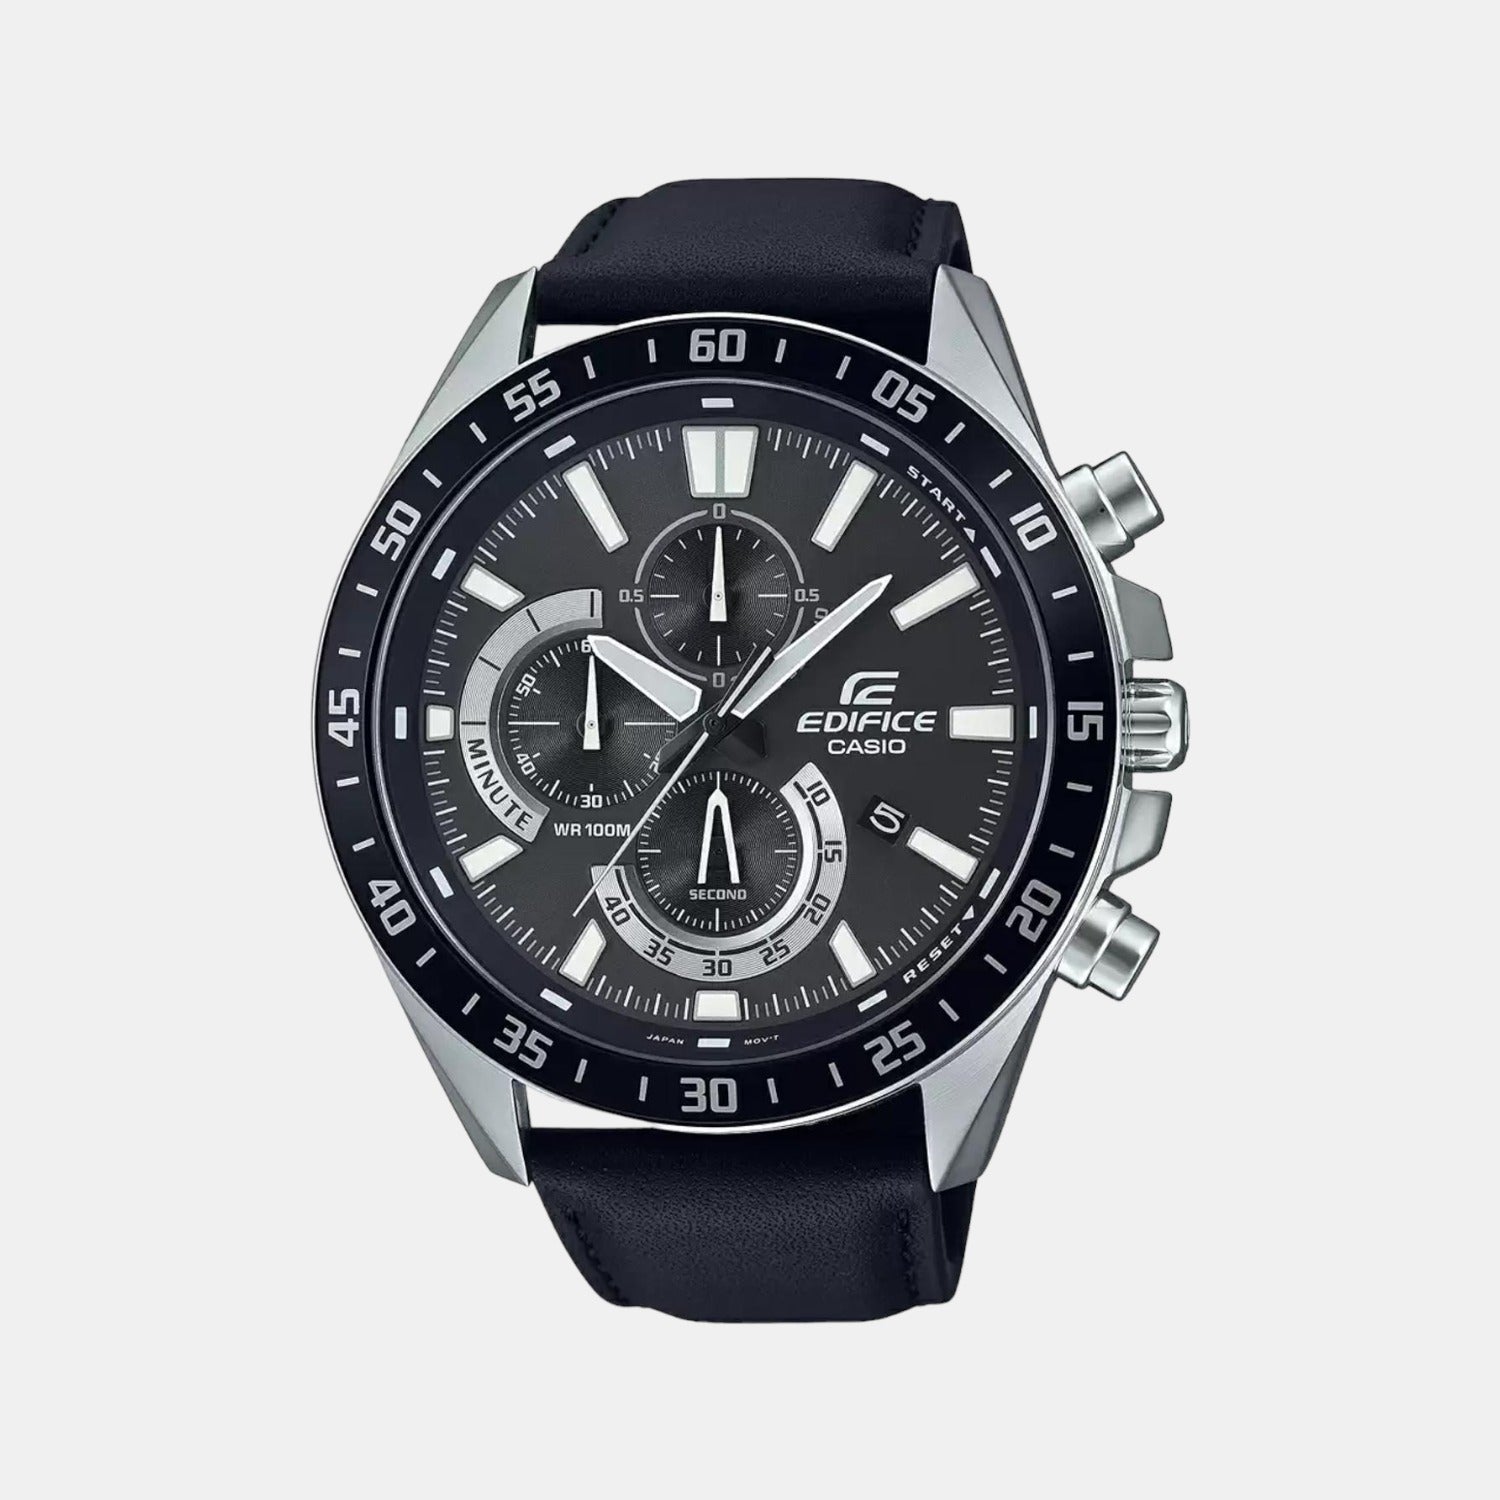 Casio Edifice EX176 Men's Watch in Gurgaon at best price by Casio Watch  Exclusive Store - Justdial